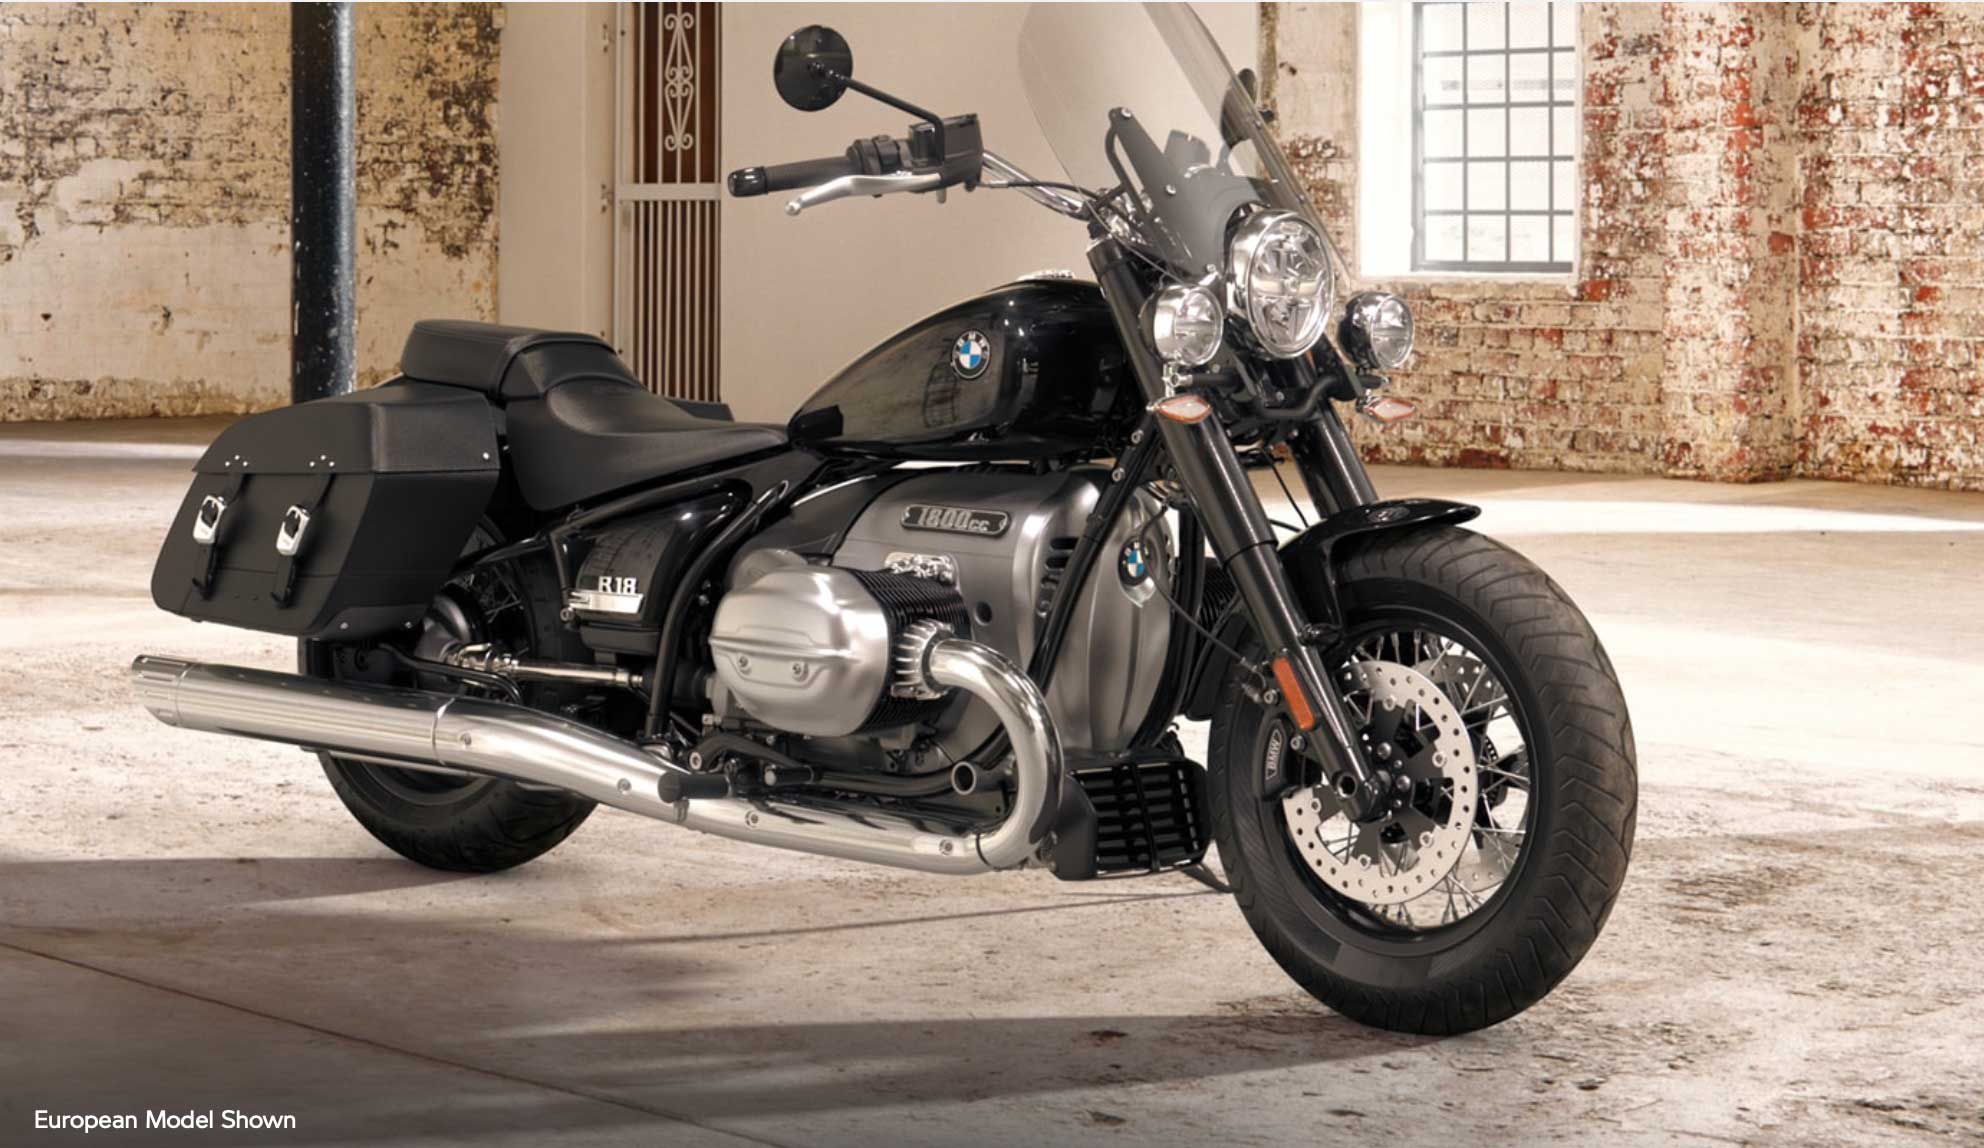 The BMW R 18 Classic, which is not particularly affordable.